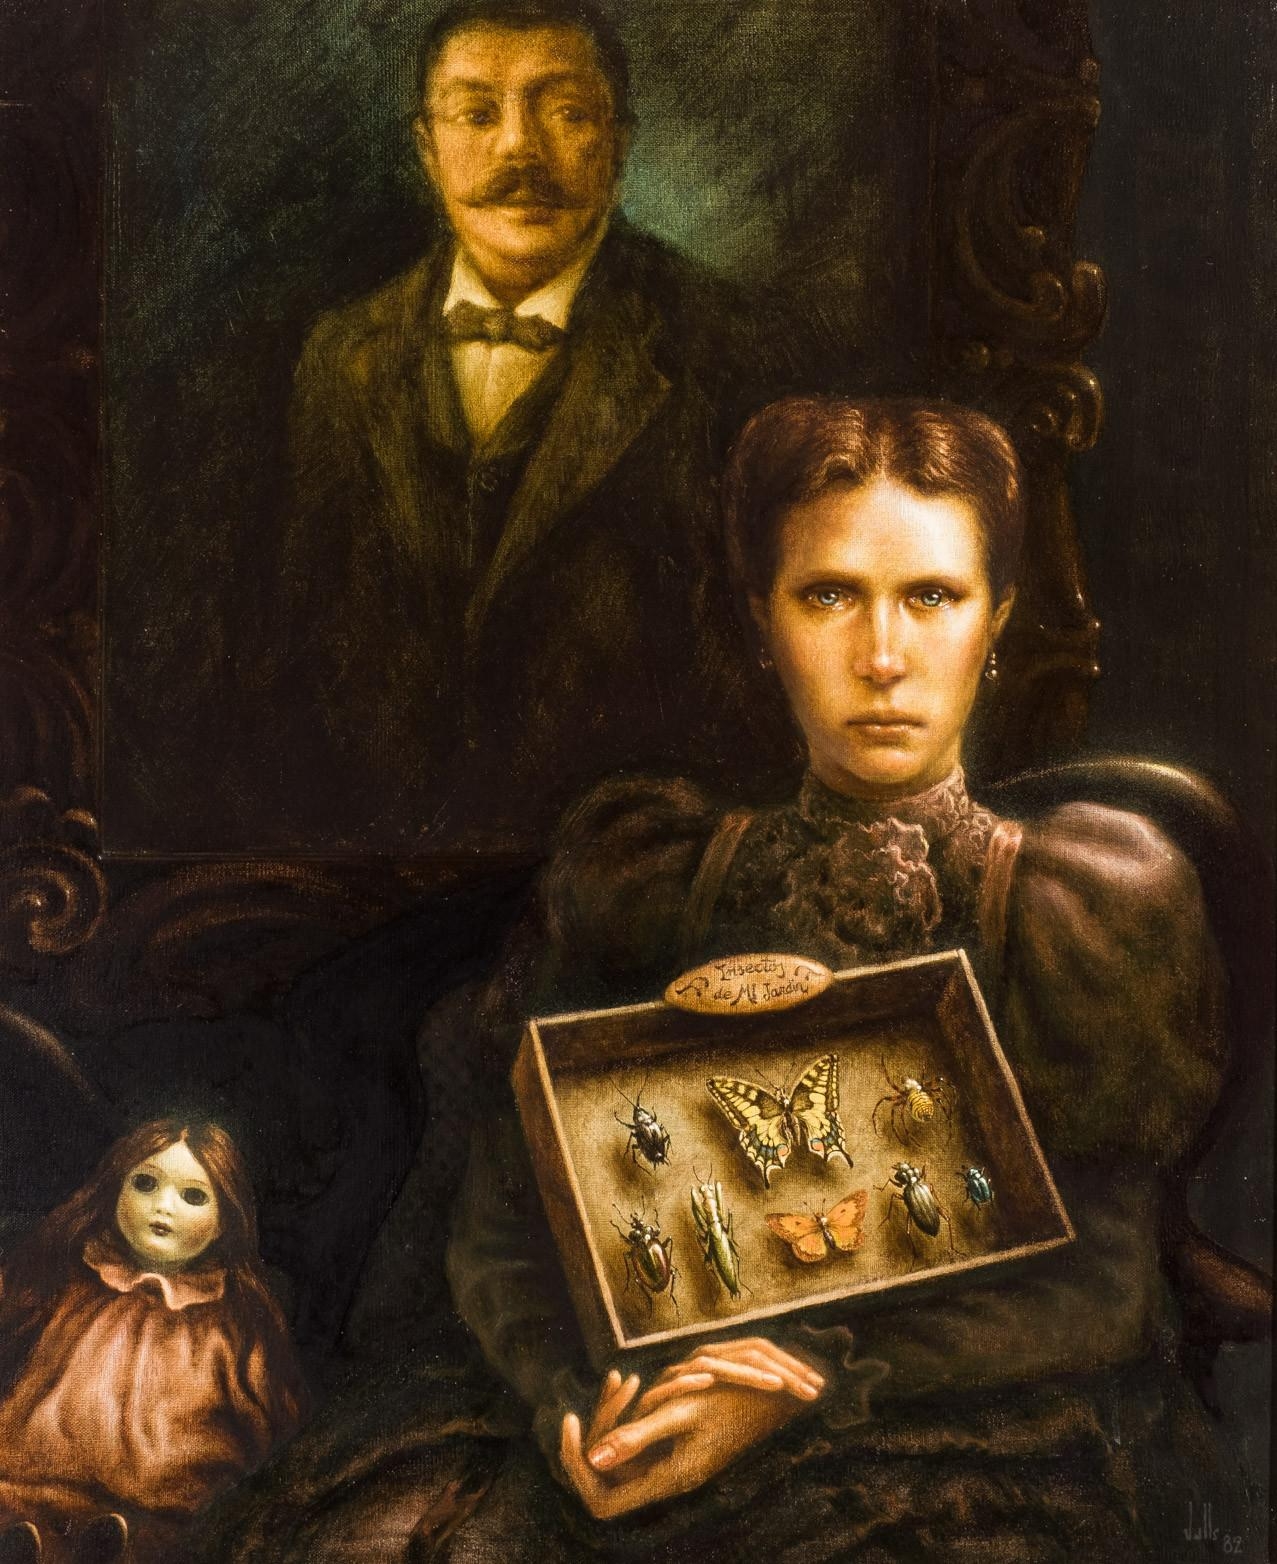 My insects by Dino Valls, 1982